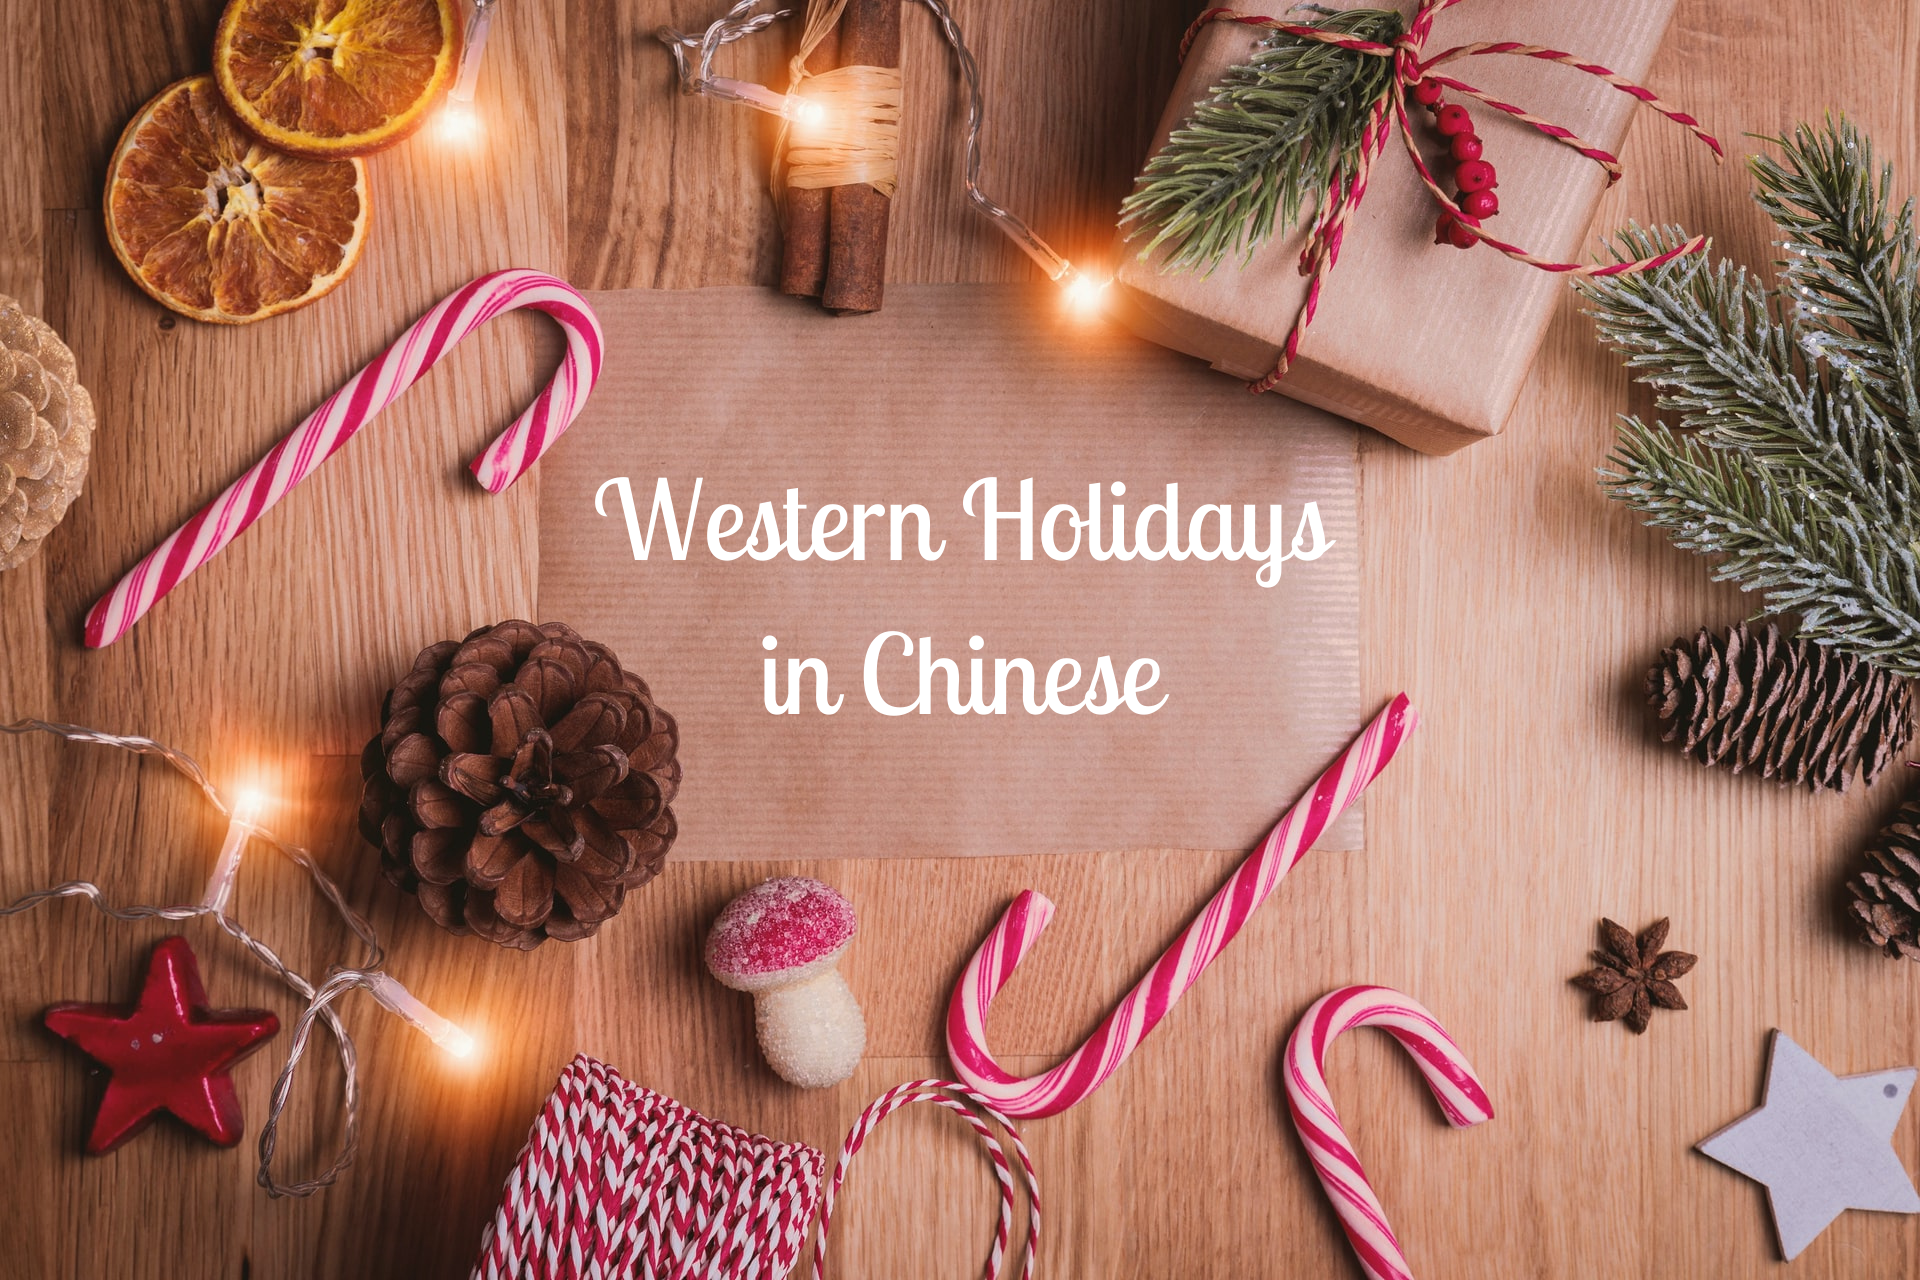 Western Holidays in Chinese